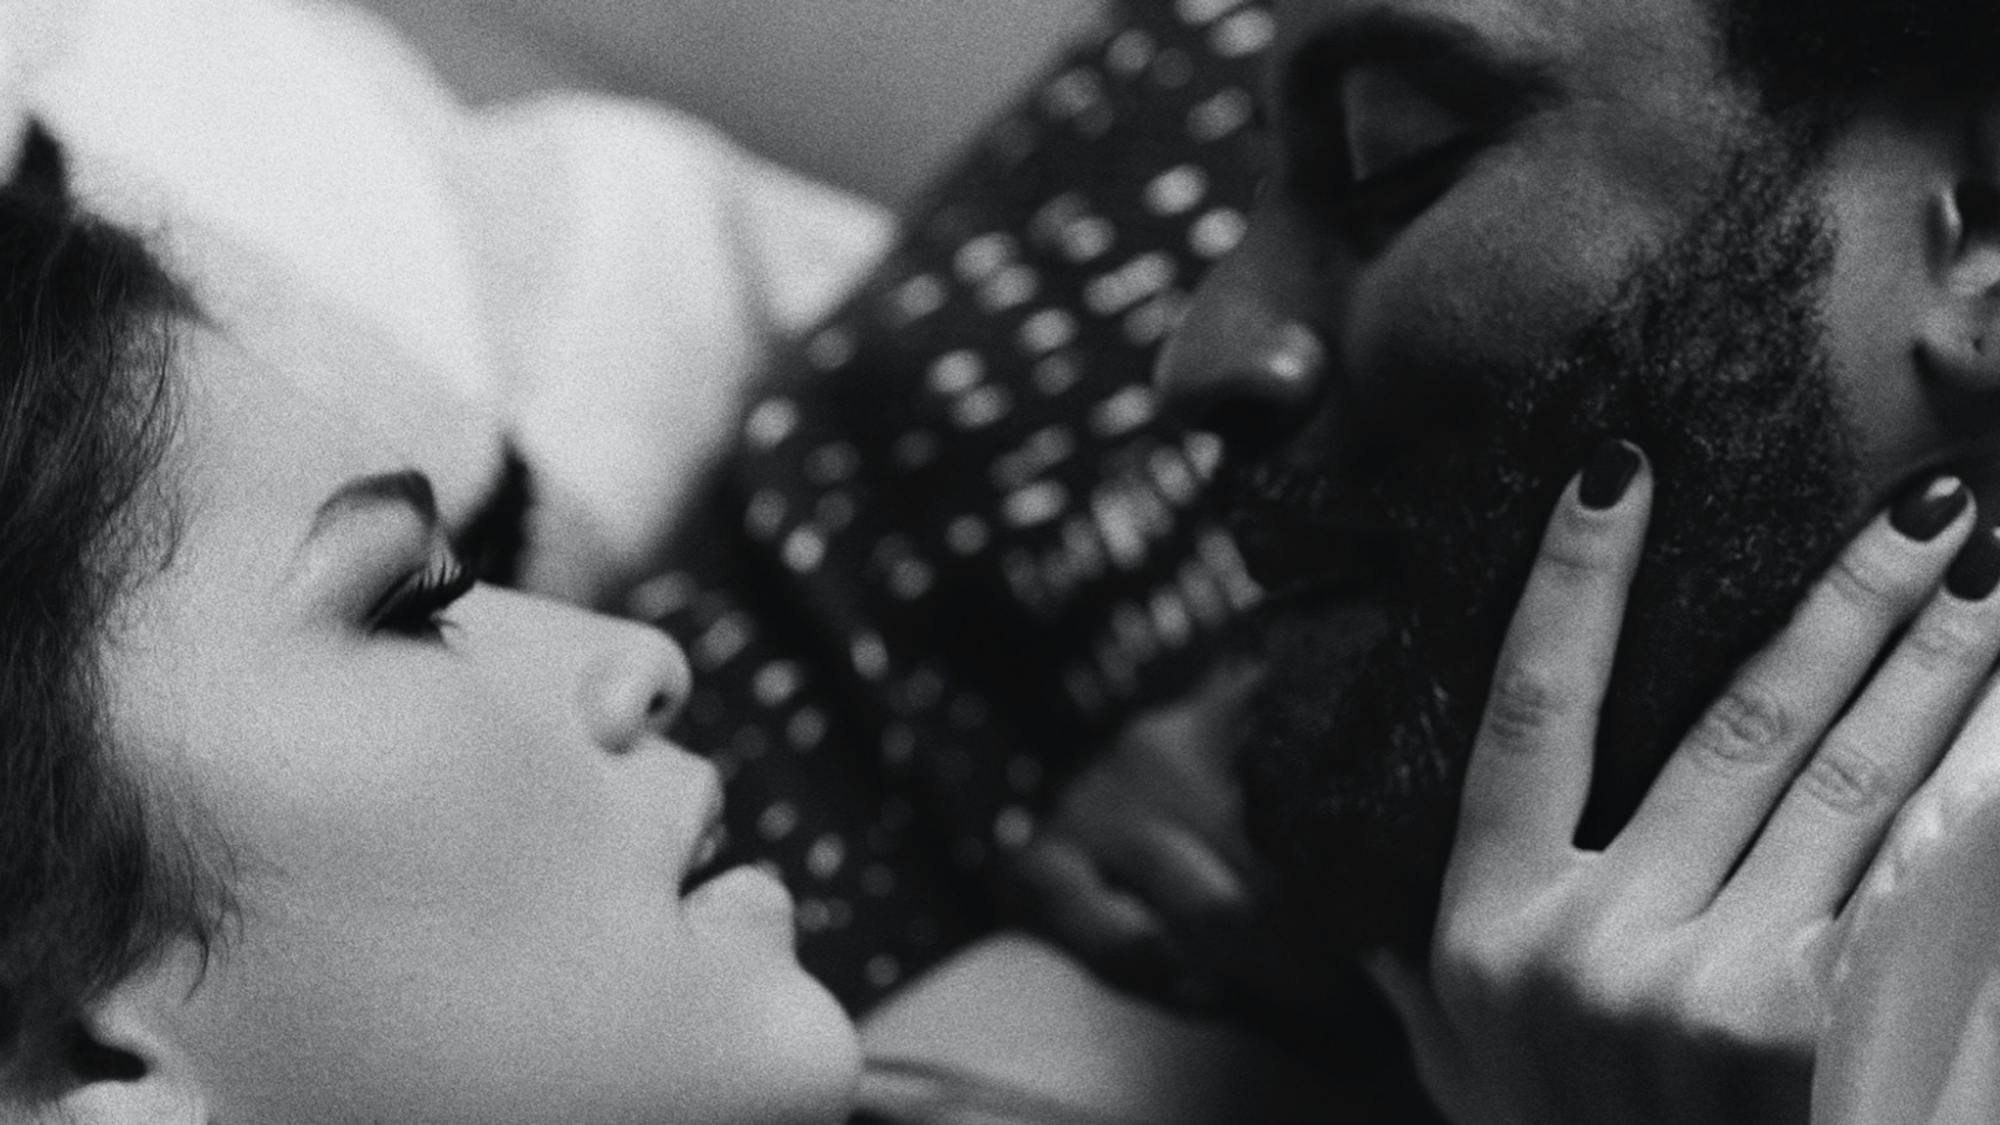 A still from Malcolm & Marie shows the film’s protagonists in closeup. Marie and Malcolm appear in profile, looking into each other’s faces. Marie holds Malcolm’s chin.